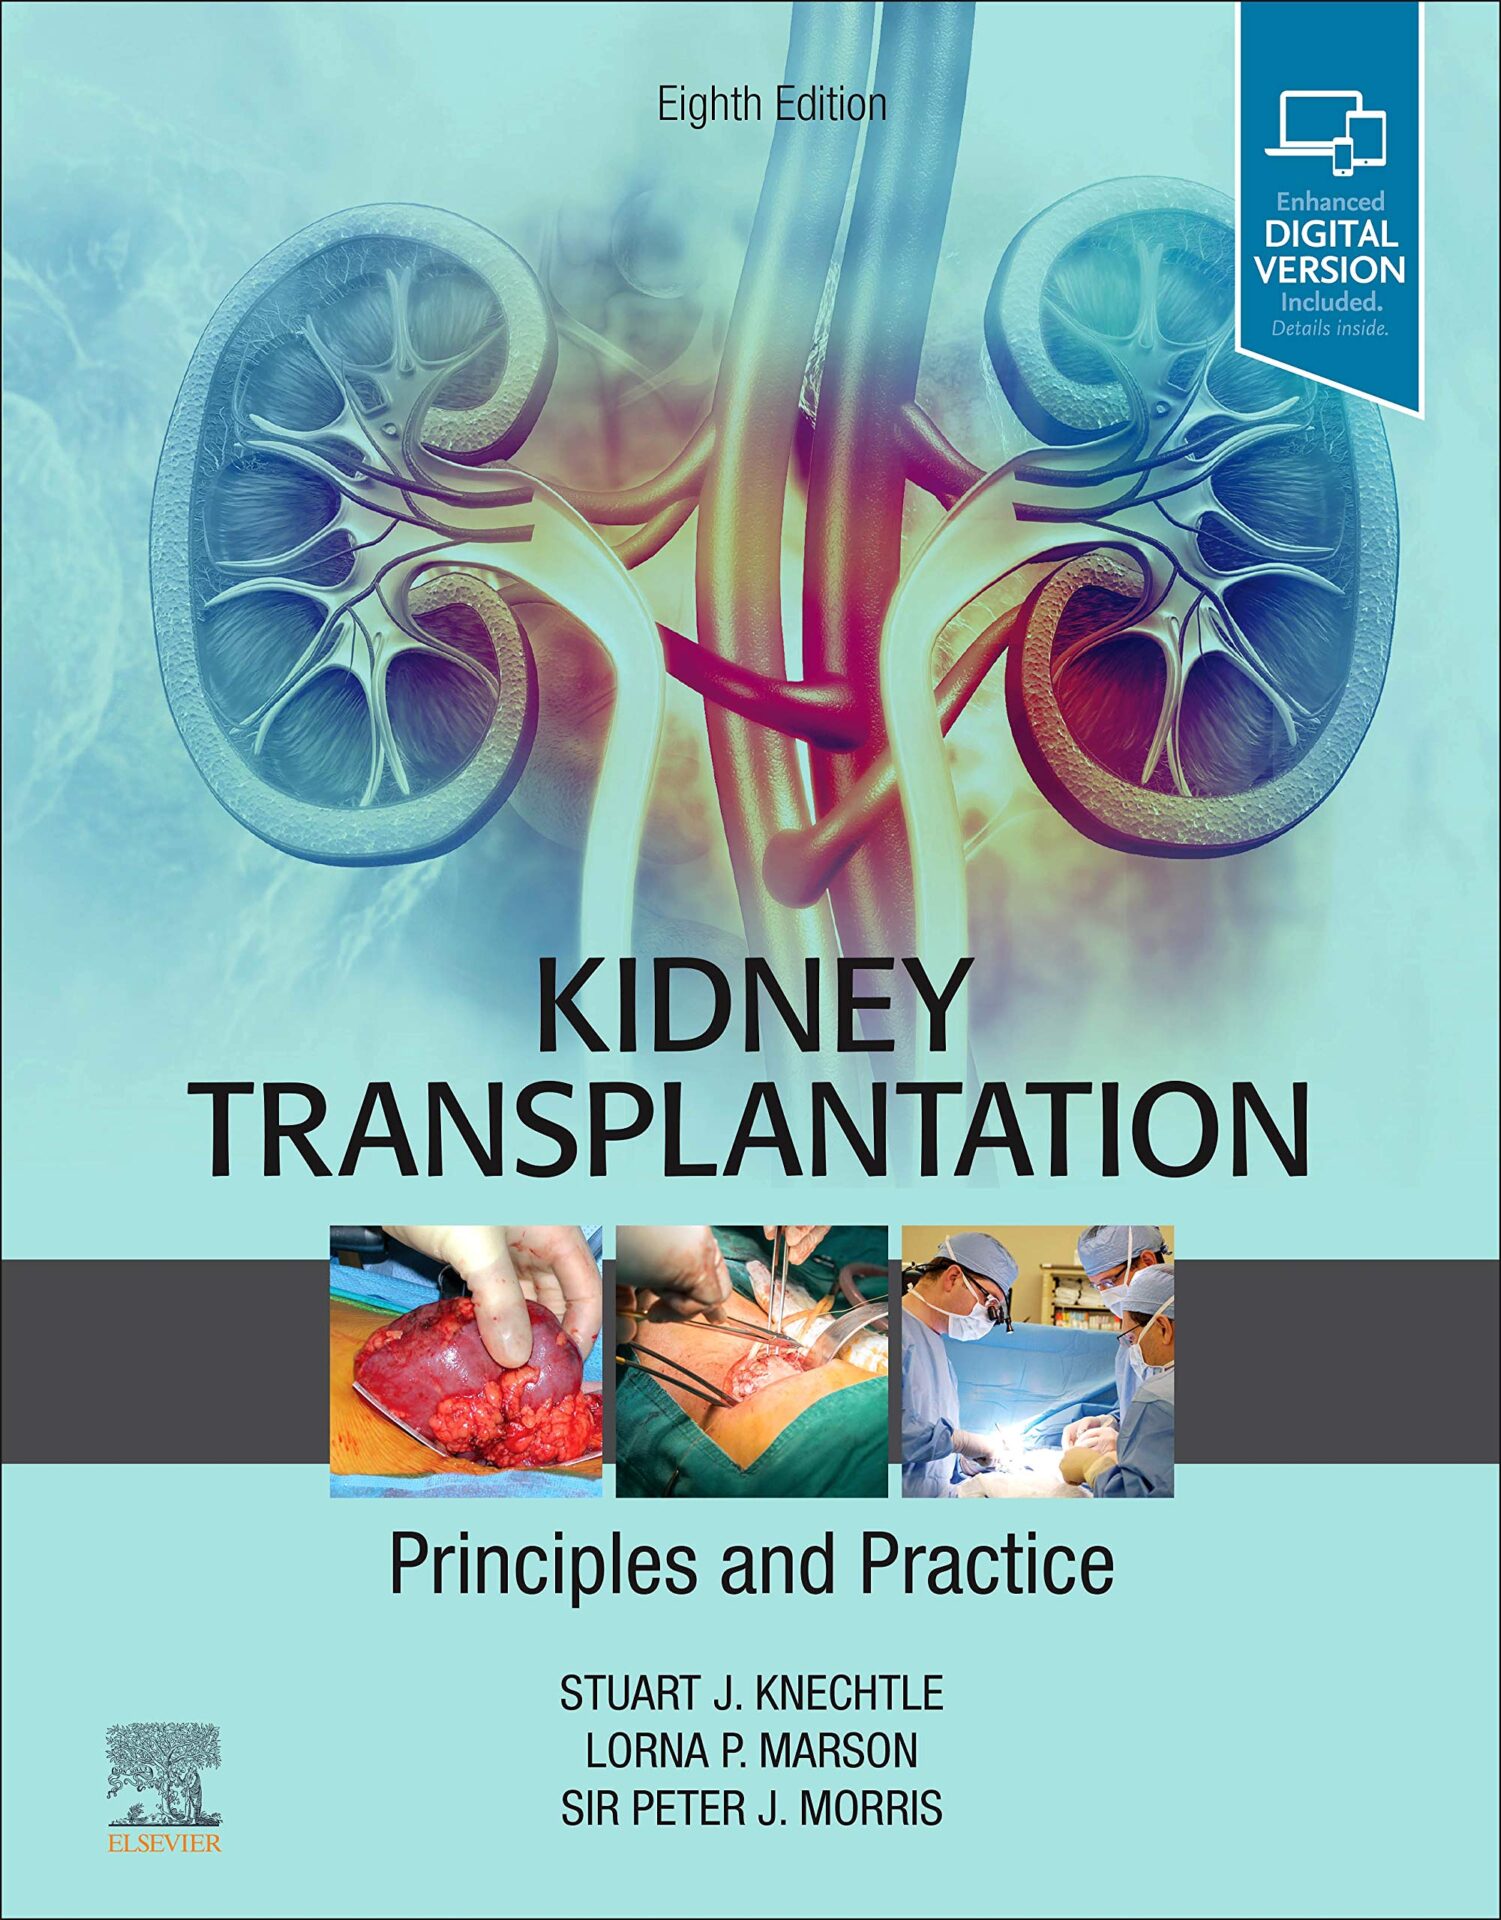 Kidney Transplantation: Principles and Practice, 6th Edition